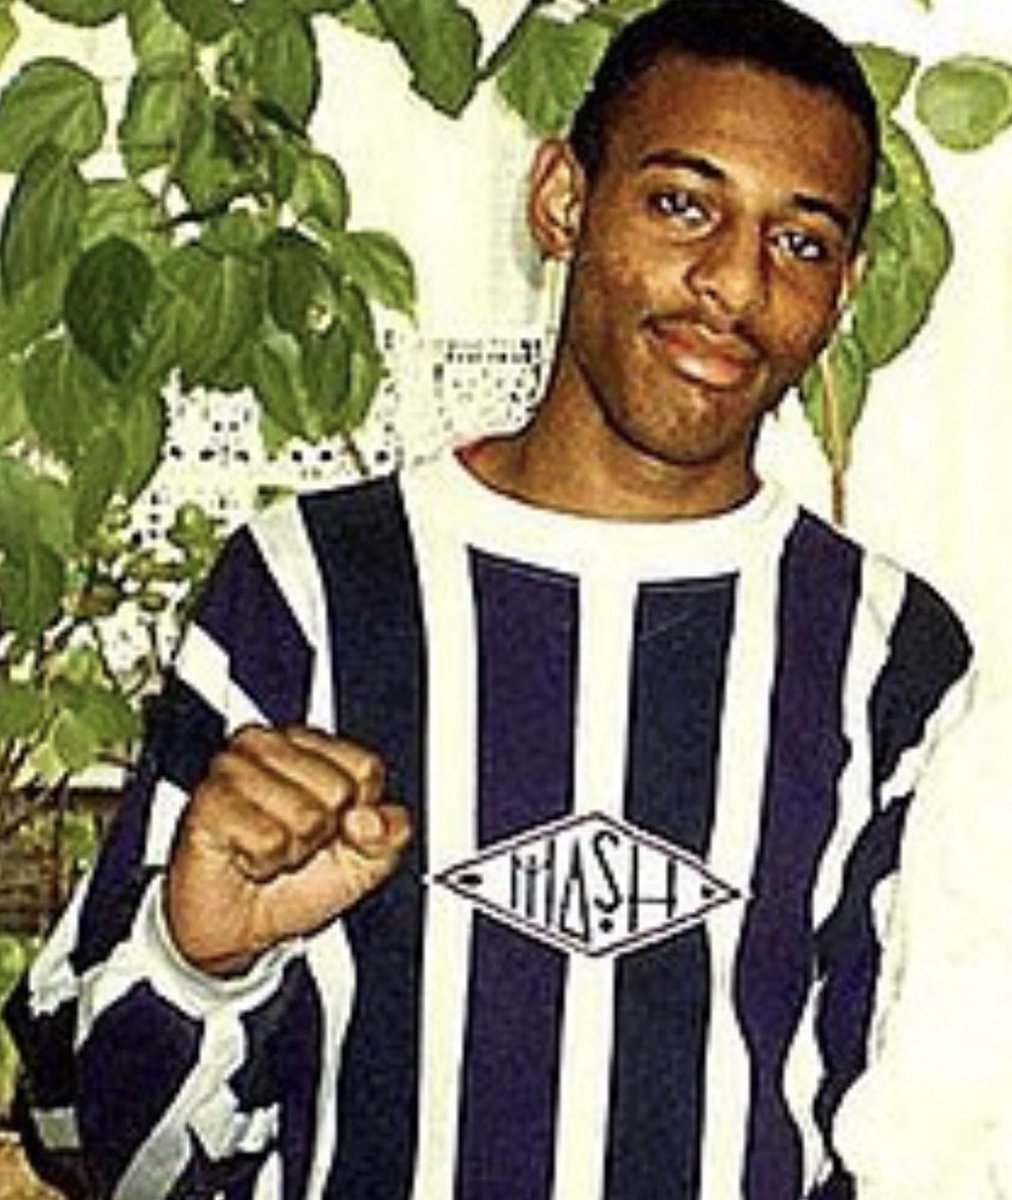 Rest in power #StephenLawrence30 . I’m sure you would have achieved so much in life if you had the chance. Still remember this awful day  and saddened that things haven’t really changed much, since then.